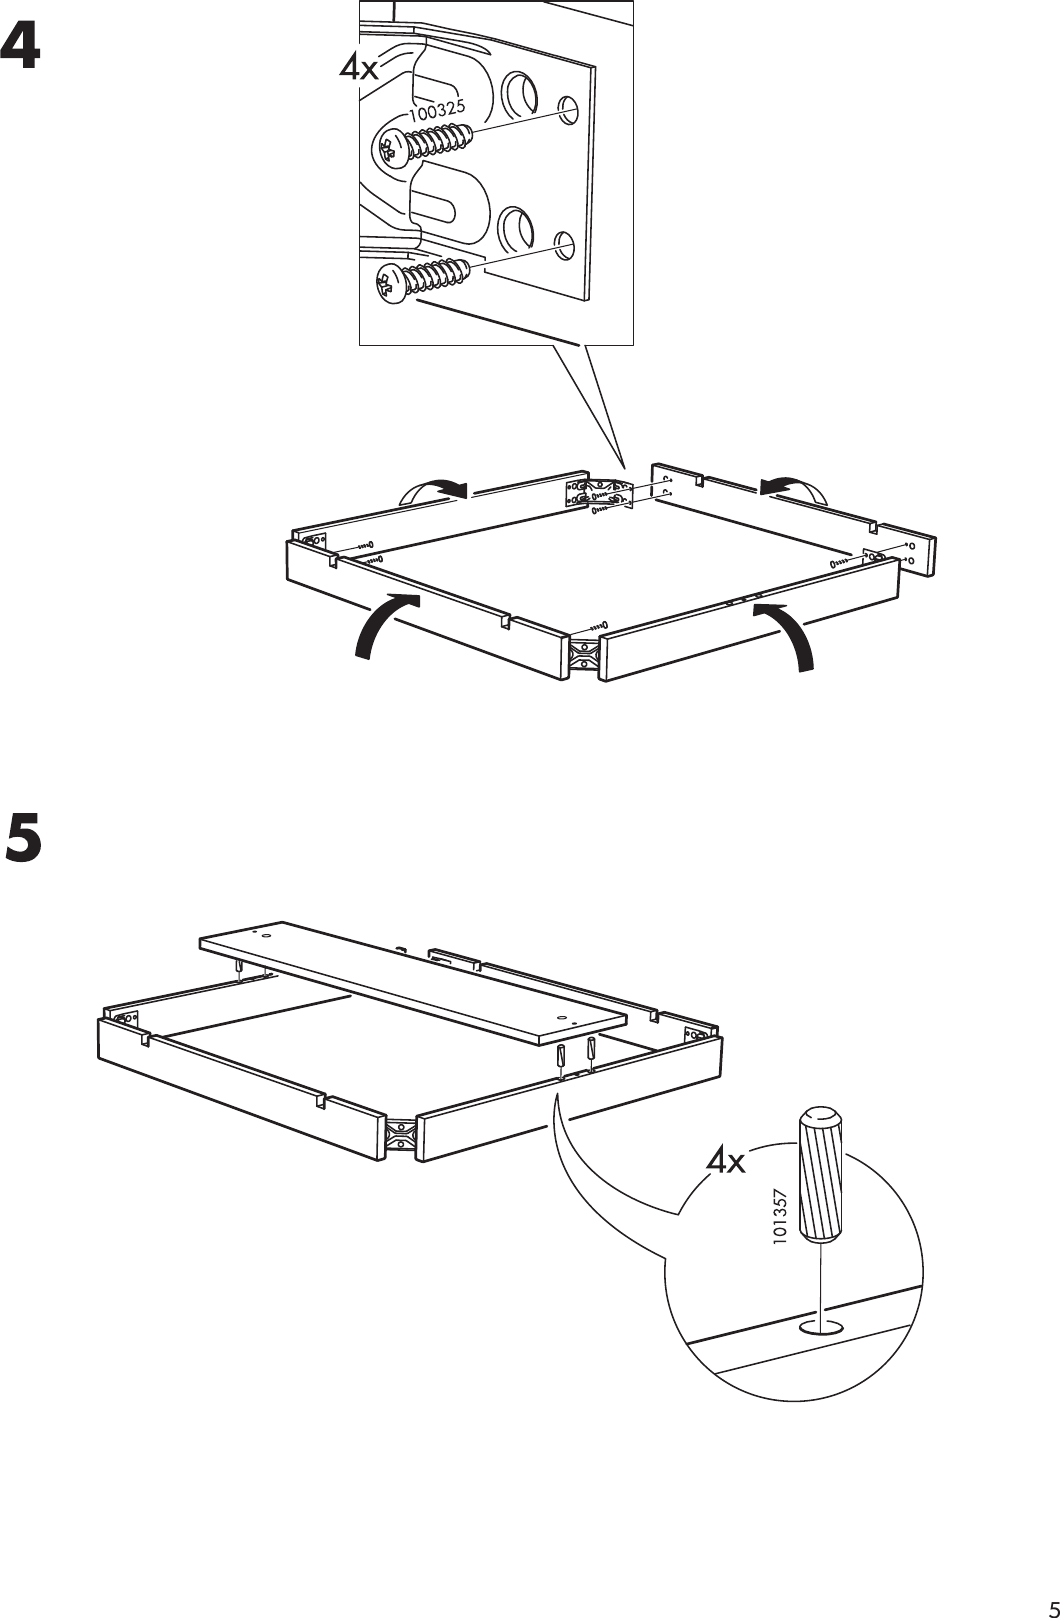 Page 5 of 12 - Ikea Ikea-Bjursta-Extendable-Dining-Table-20-28-35-X35-Assembly-Instruction